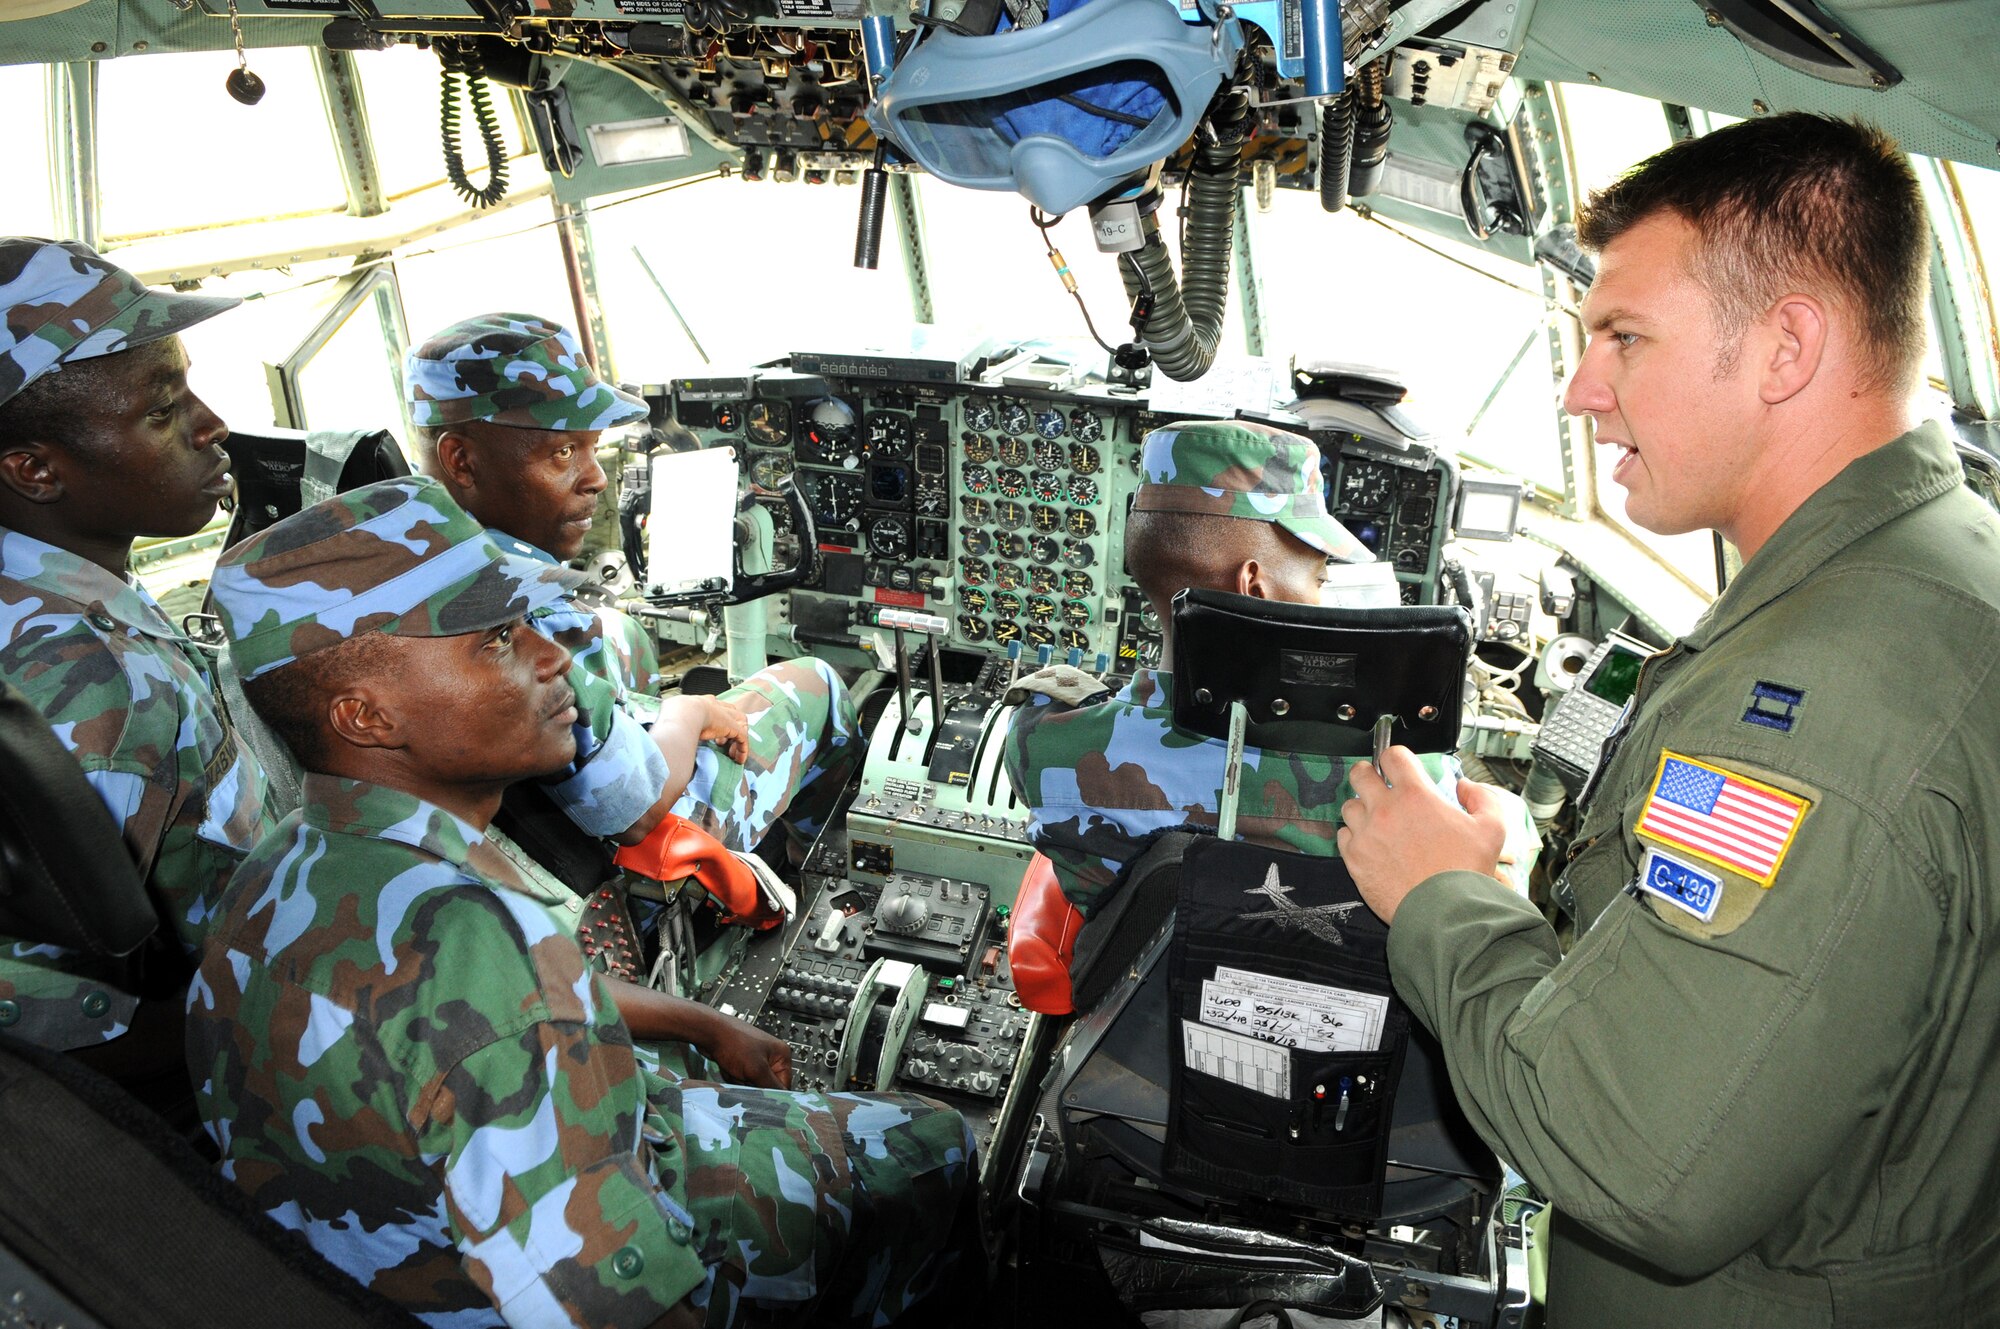 Capt. Kevin Graham, 37th Airlift Squadron pilot, gives a tour of the C-130 flight deck to members of the Ugandan Peoples Defense Force during a theater security engagement event at Entebbe, Uganda on Aug. 26. (USAF photo by Maj. Paula Kurtz) 